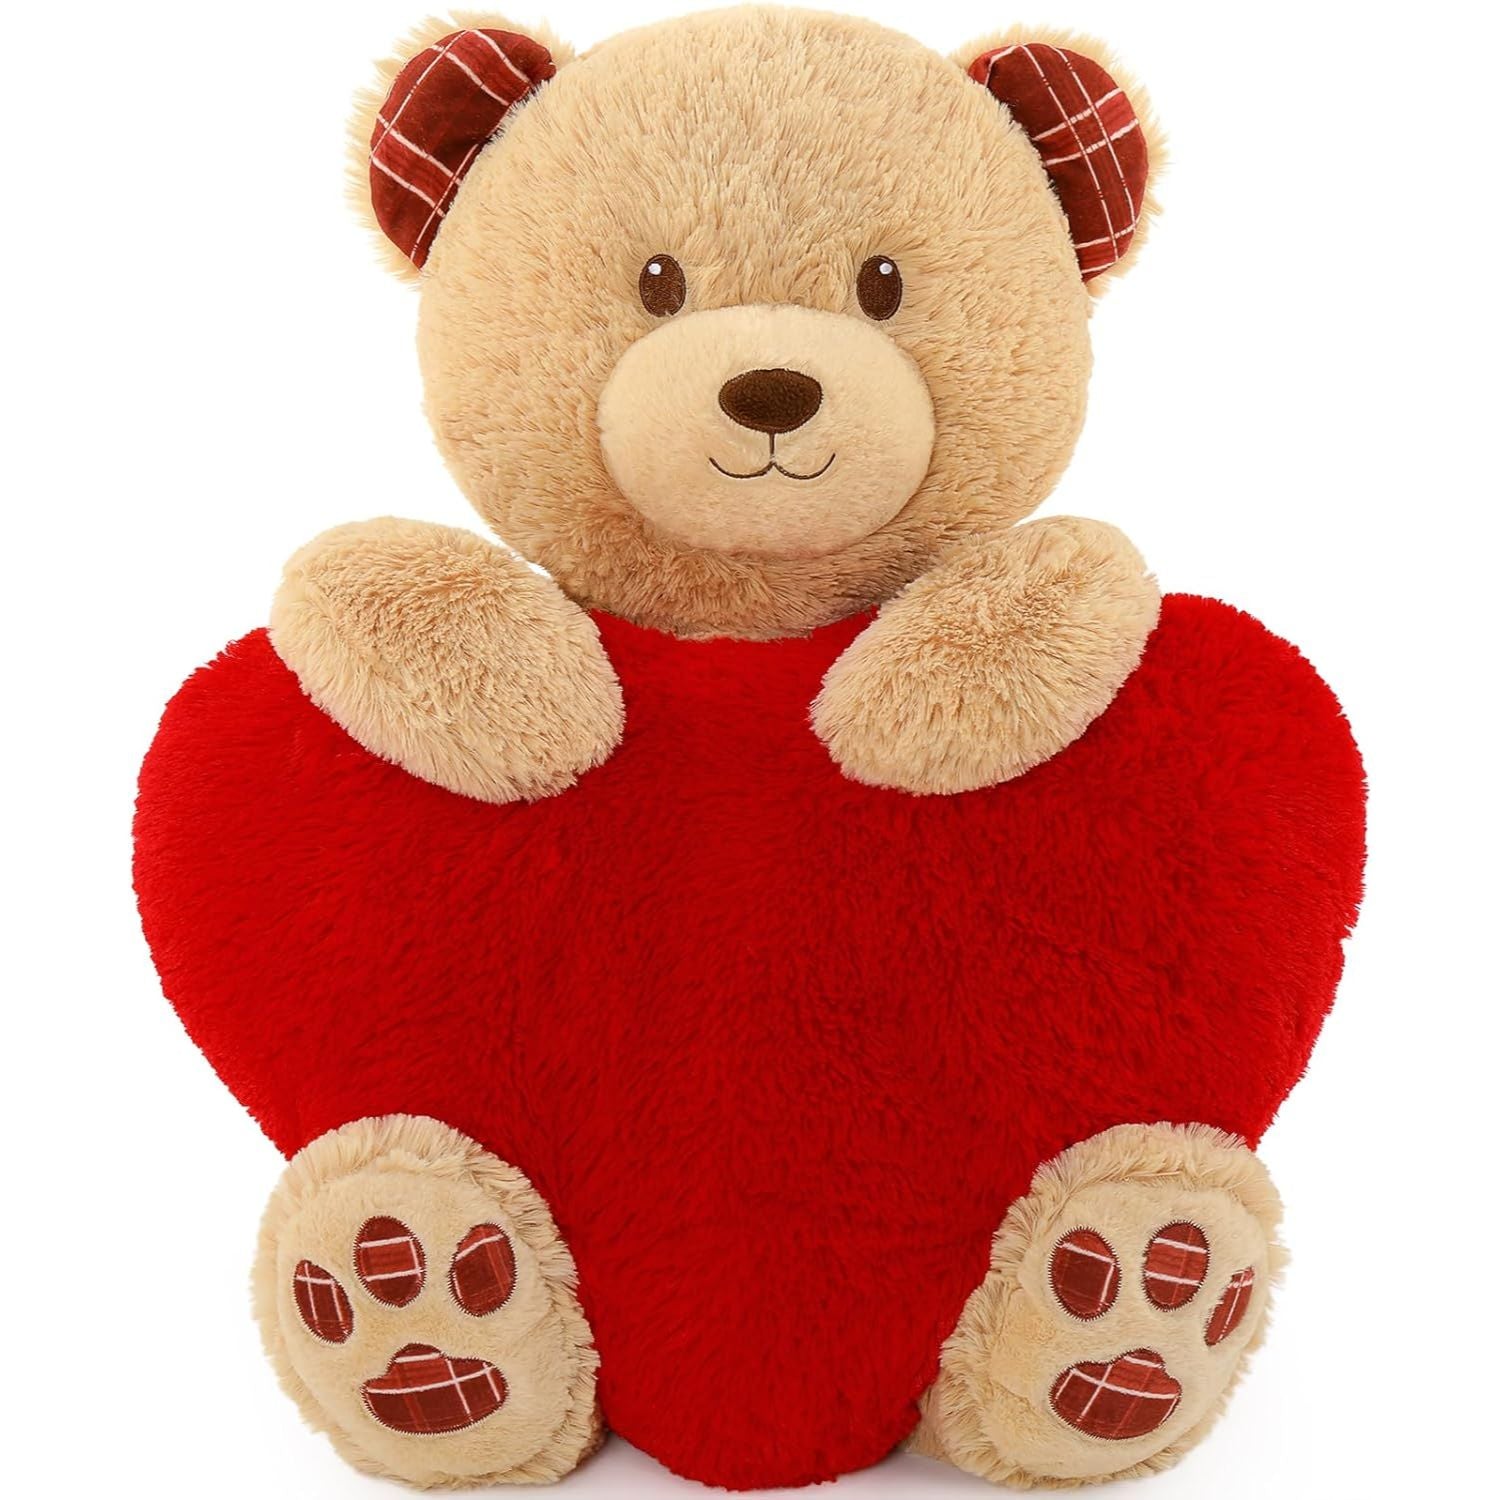 Valentine's Day Teddy Bear Plush Toy, Brown, 28 inches